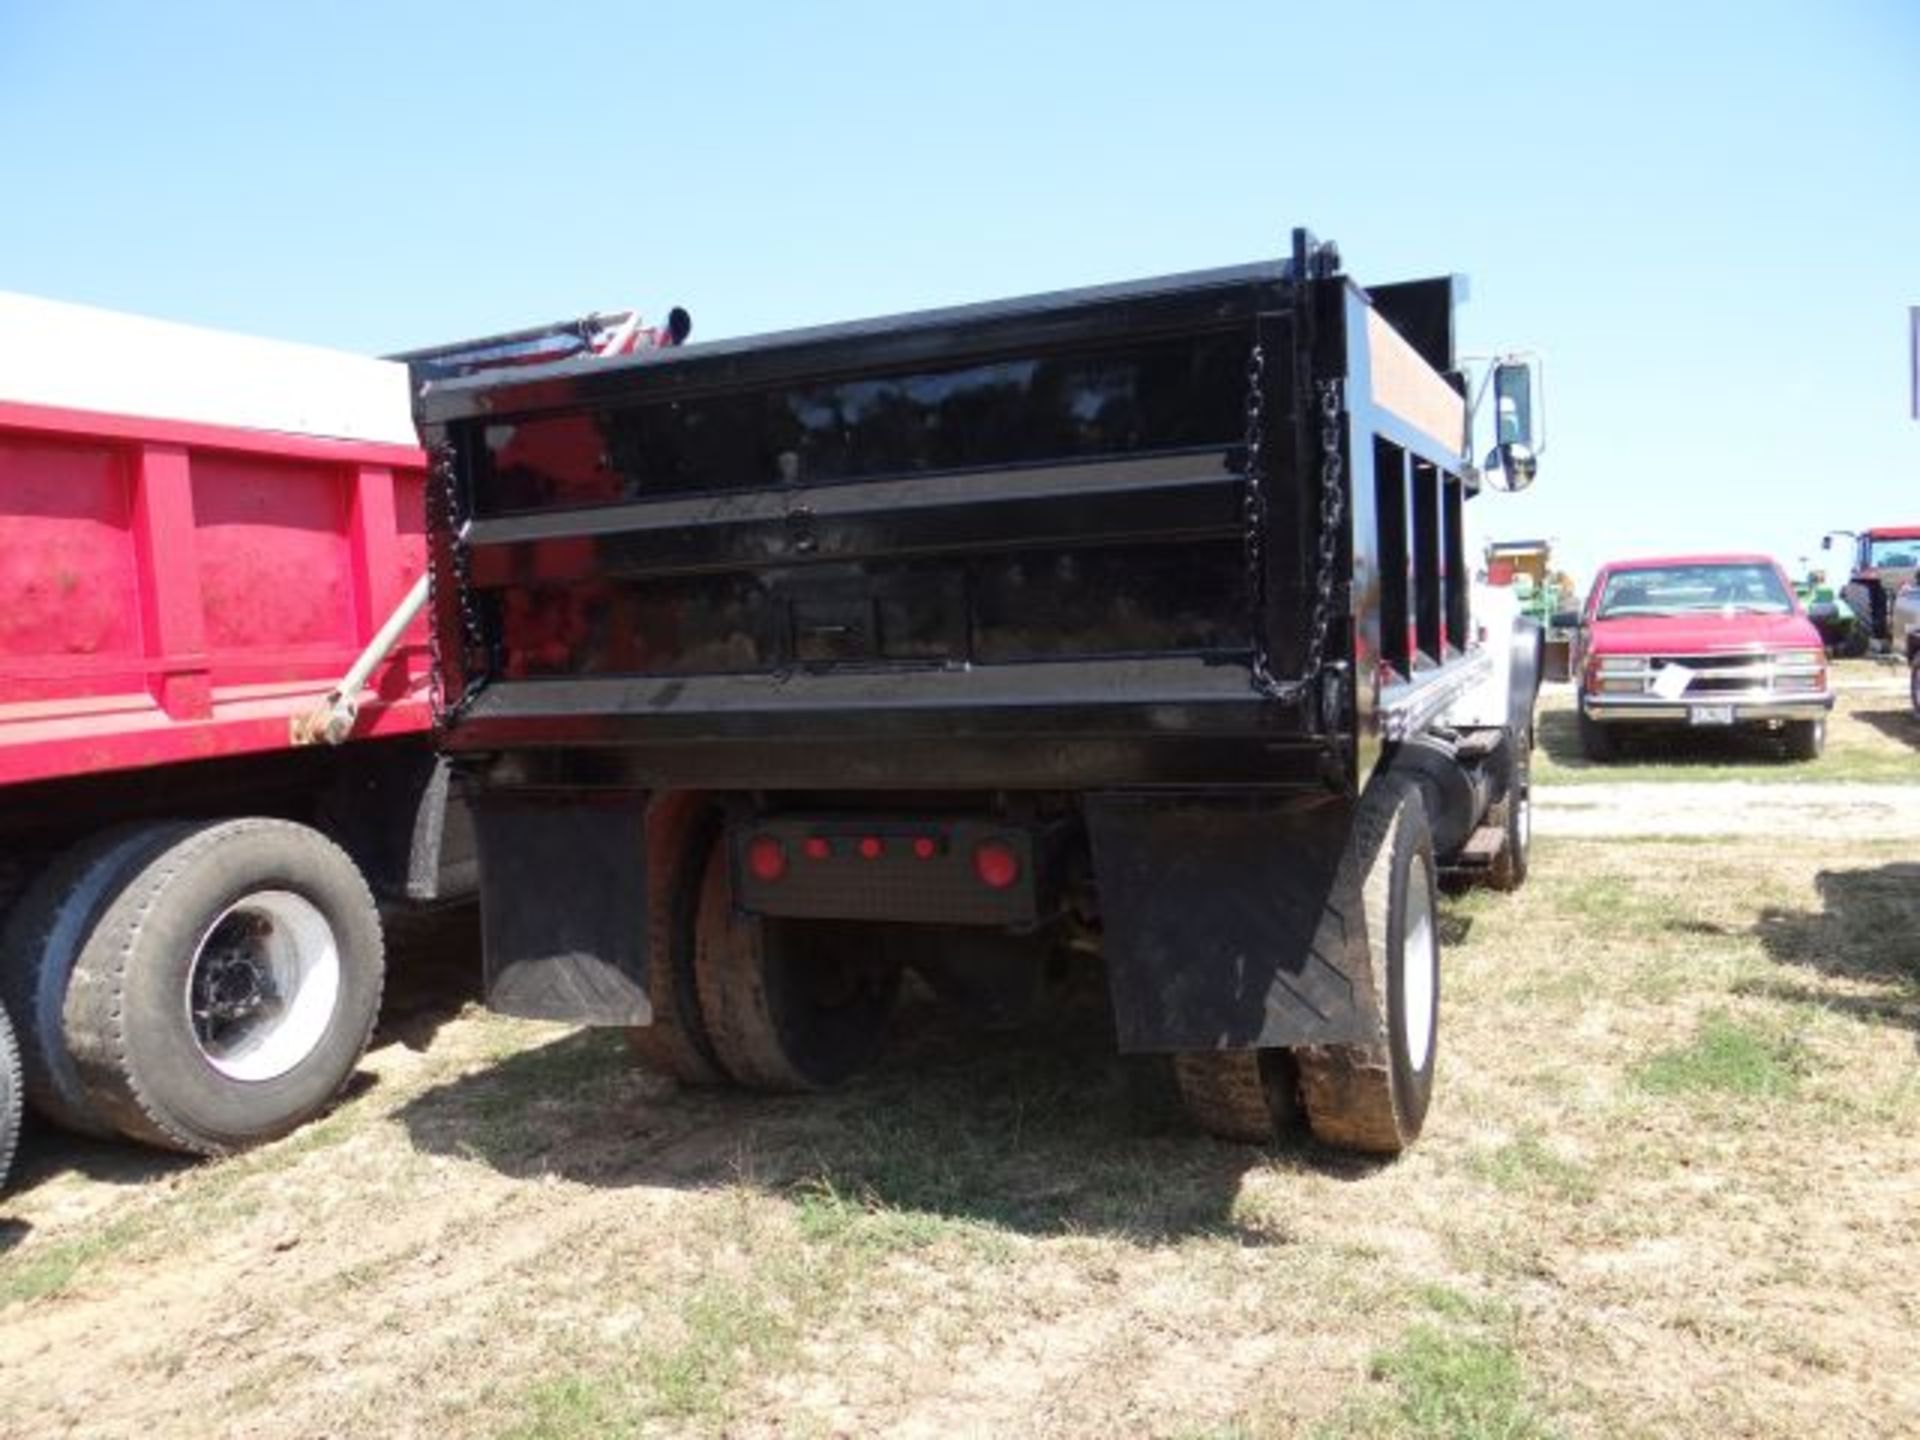 1994 Ford L7000 Dump Truck 48,378 act miles, Diesel, Auto, Title in the Office - Image 3 of 4